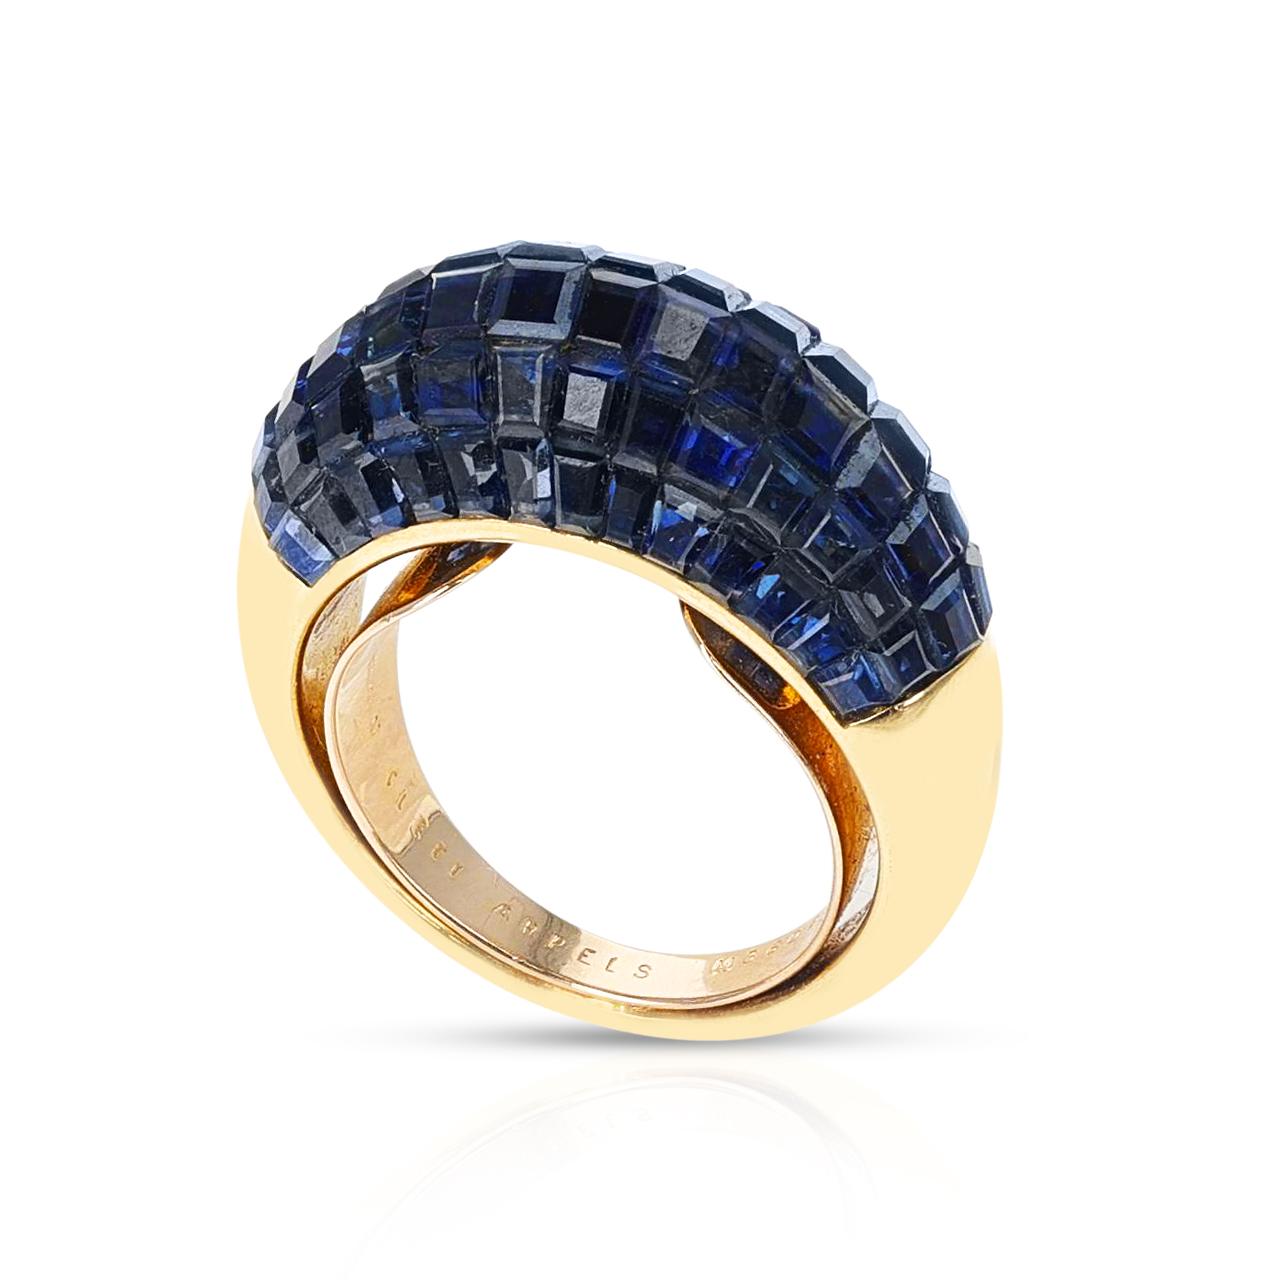 A stunning and rare Van Cleef & Arpels Mystery Invisible Set Sapphire Ring with French Marks. The ring size is US 6.50.  